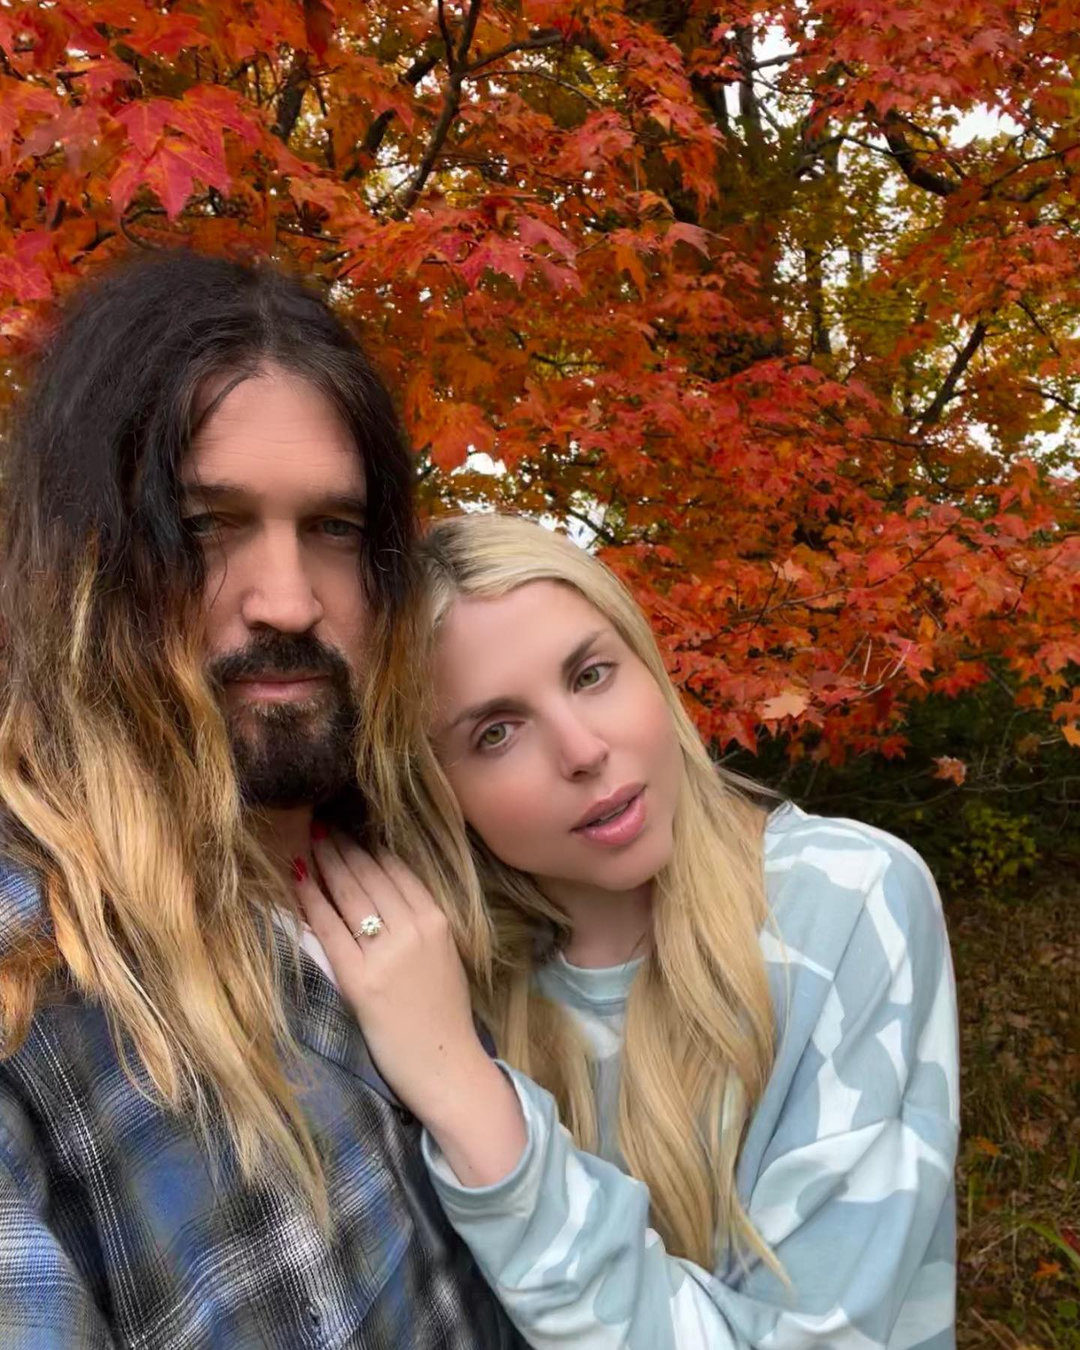 Billy Ray Cyrus and Fiancée Firerose Share Insight Into Their Romance